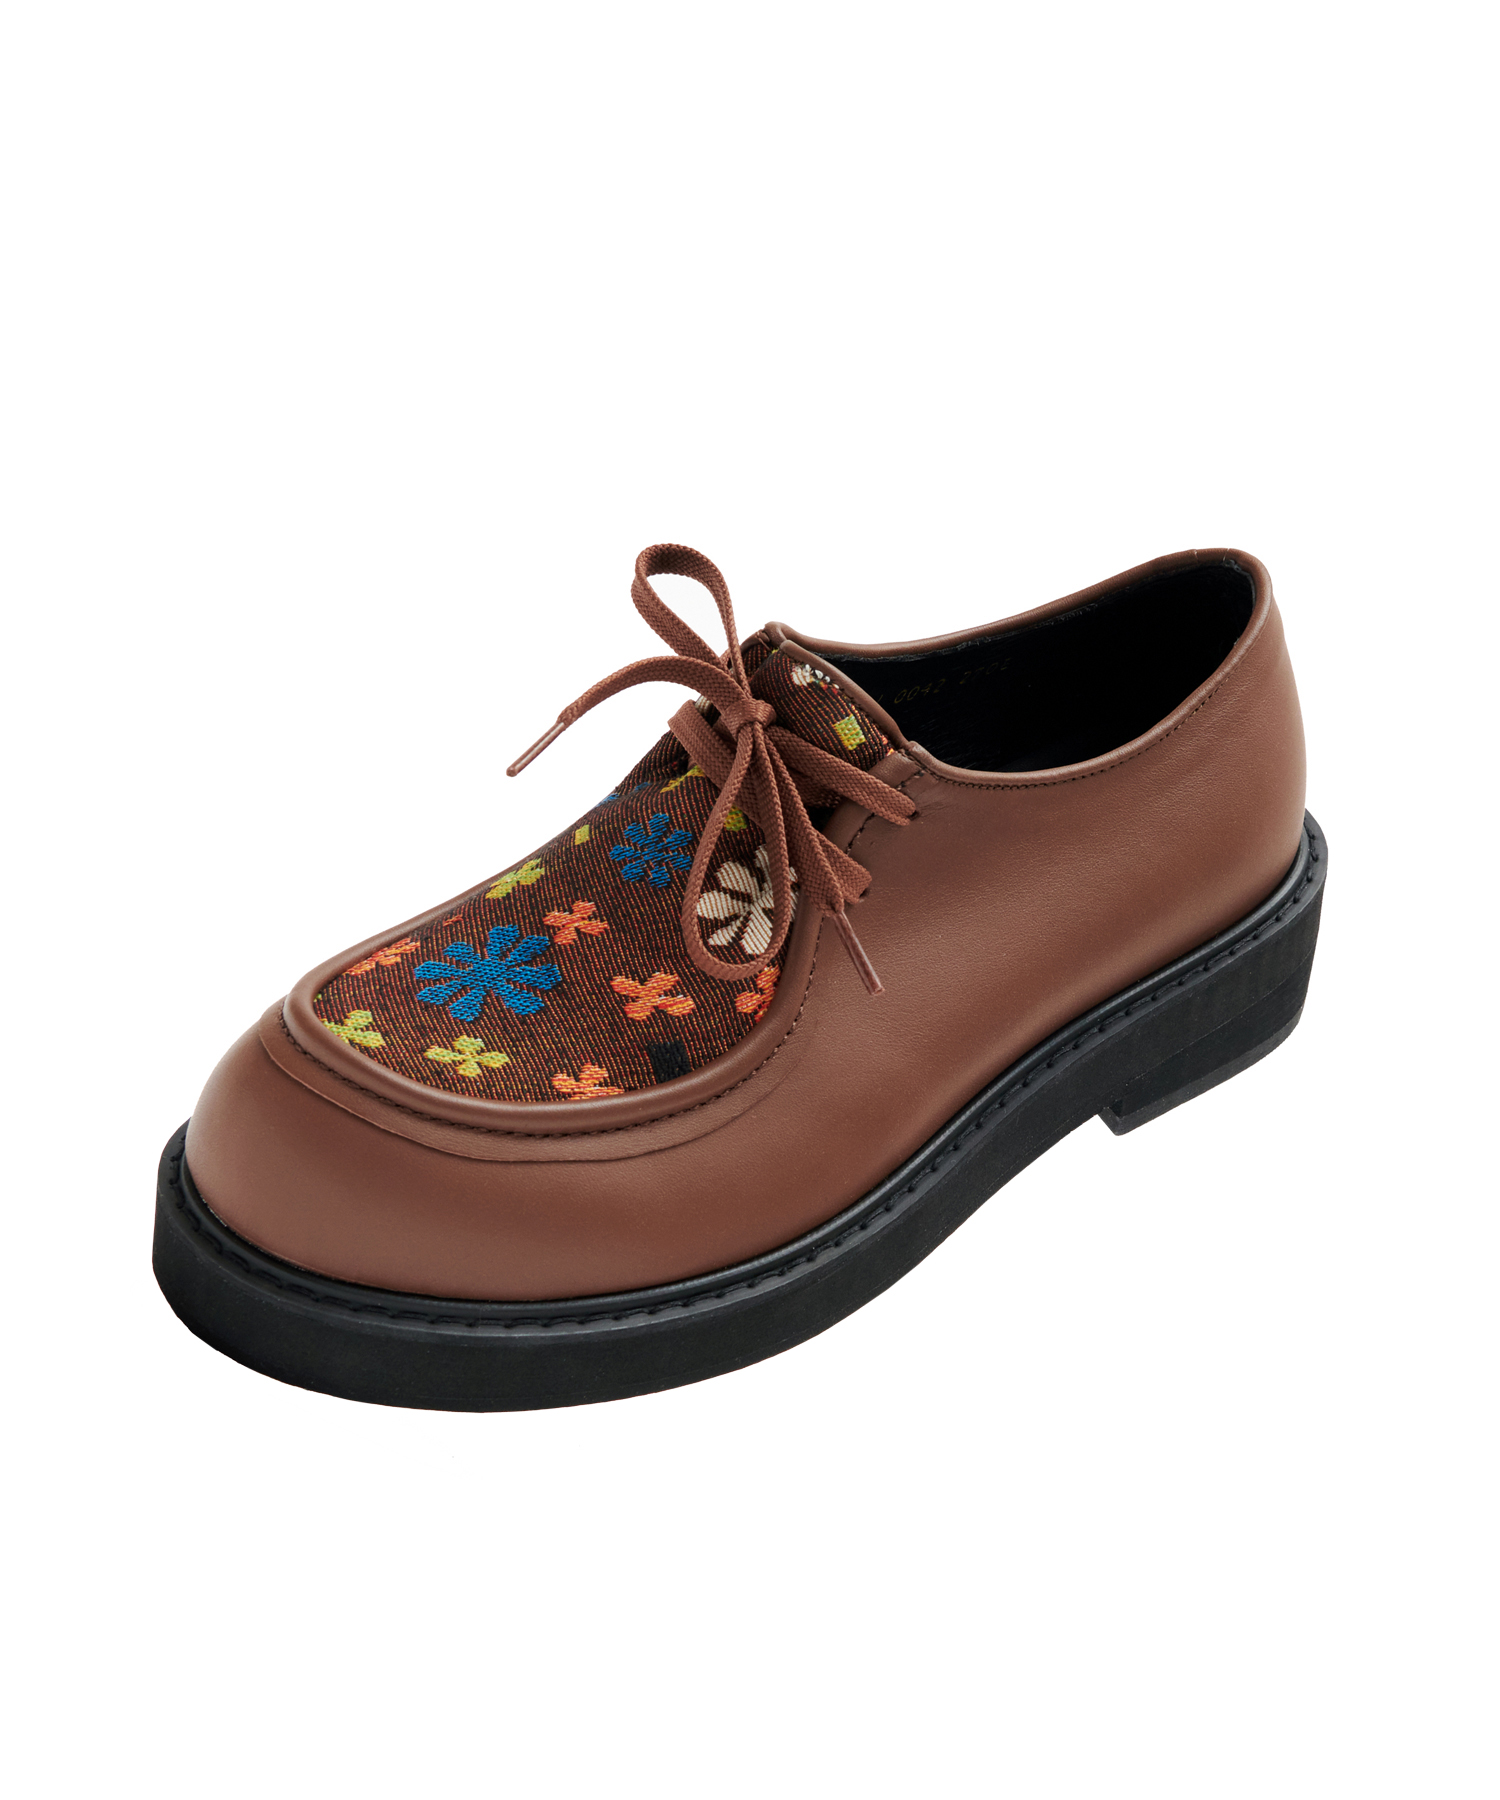 LMMM FLOWER LUCK SHOES BROWN